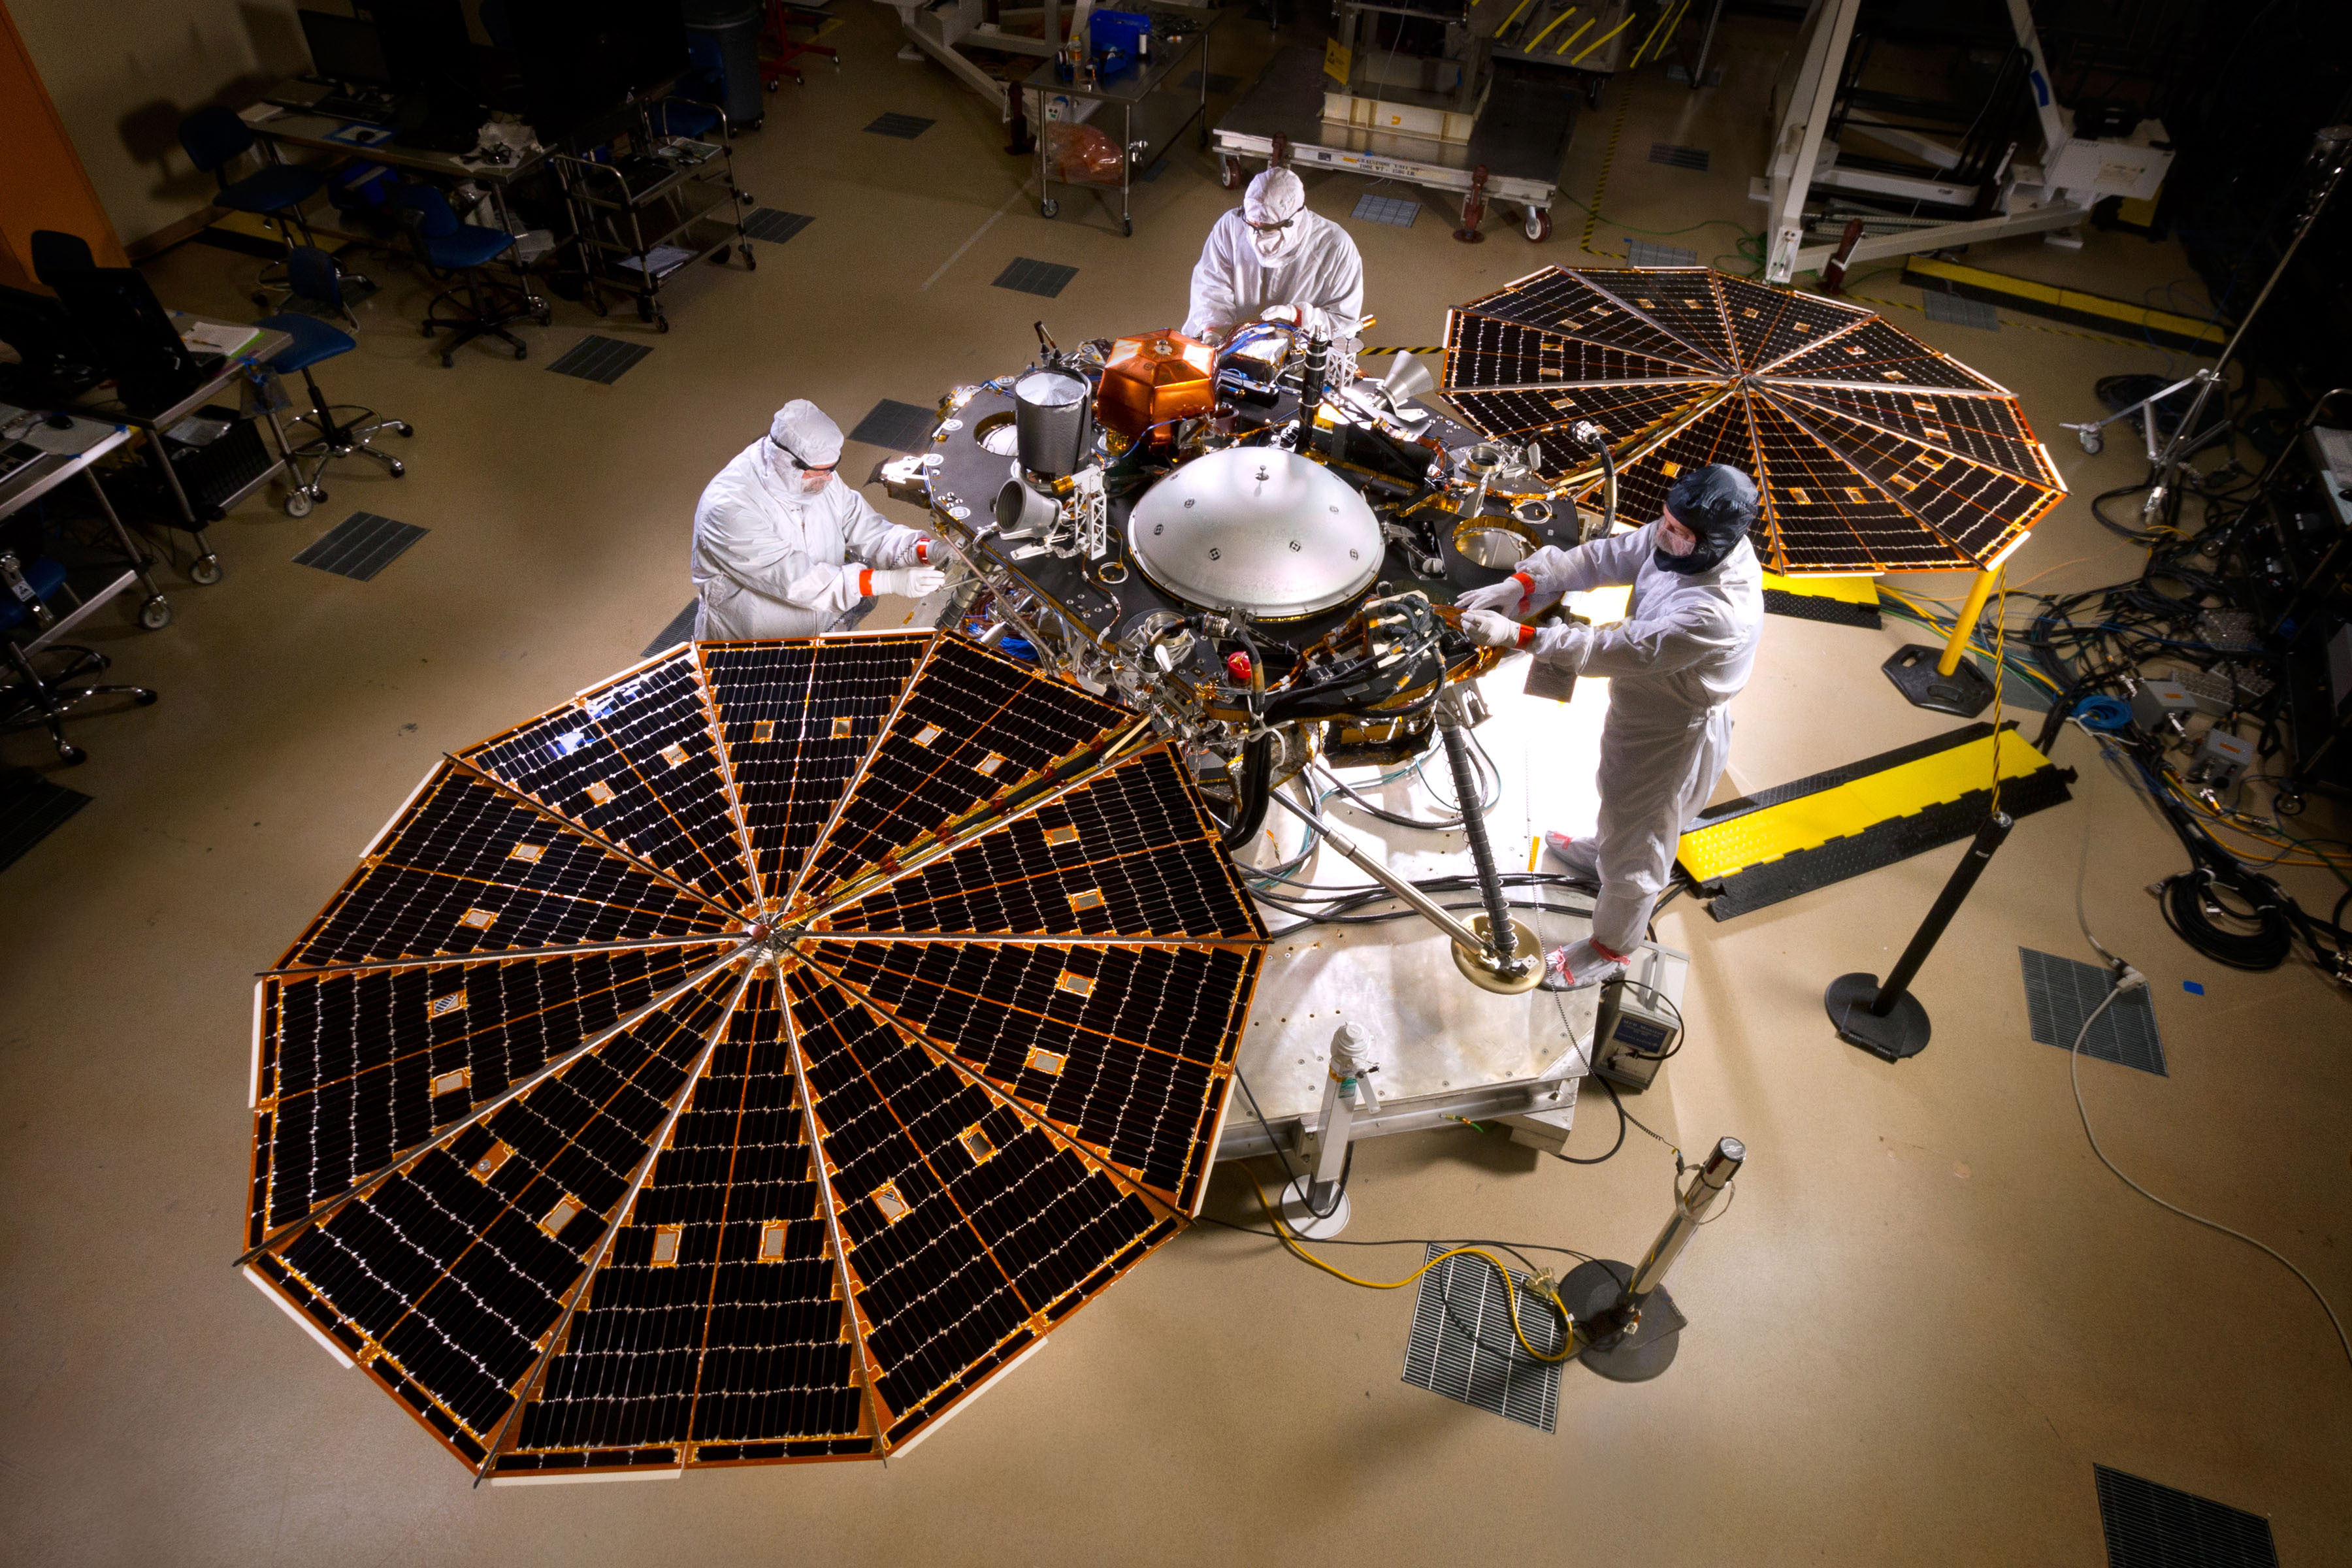 The insight lander is fully opened with solar panels spread wide for this cleanroom photo. Several engineers are working on the rover.